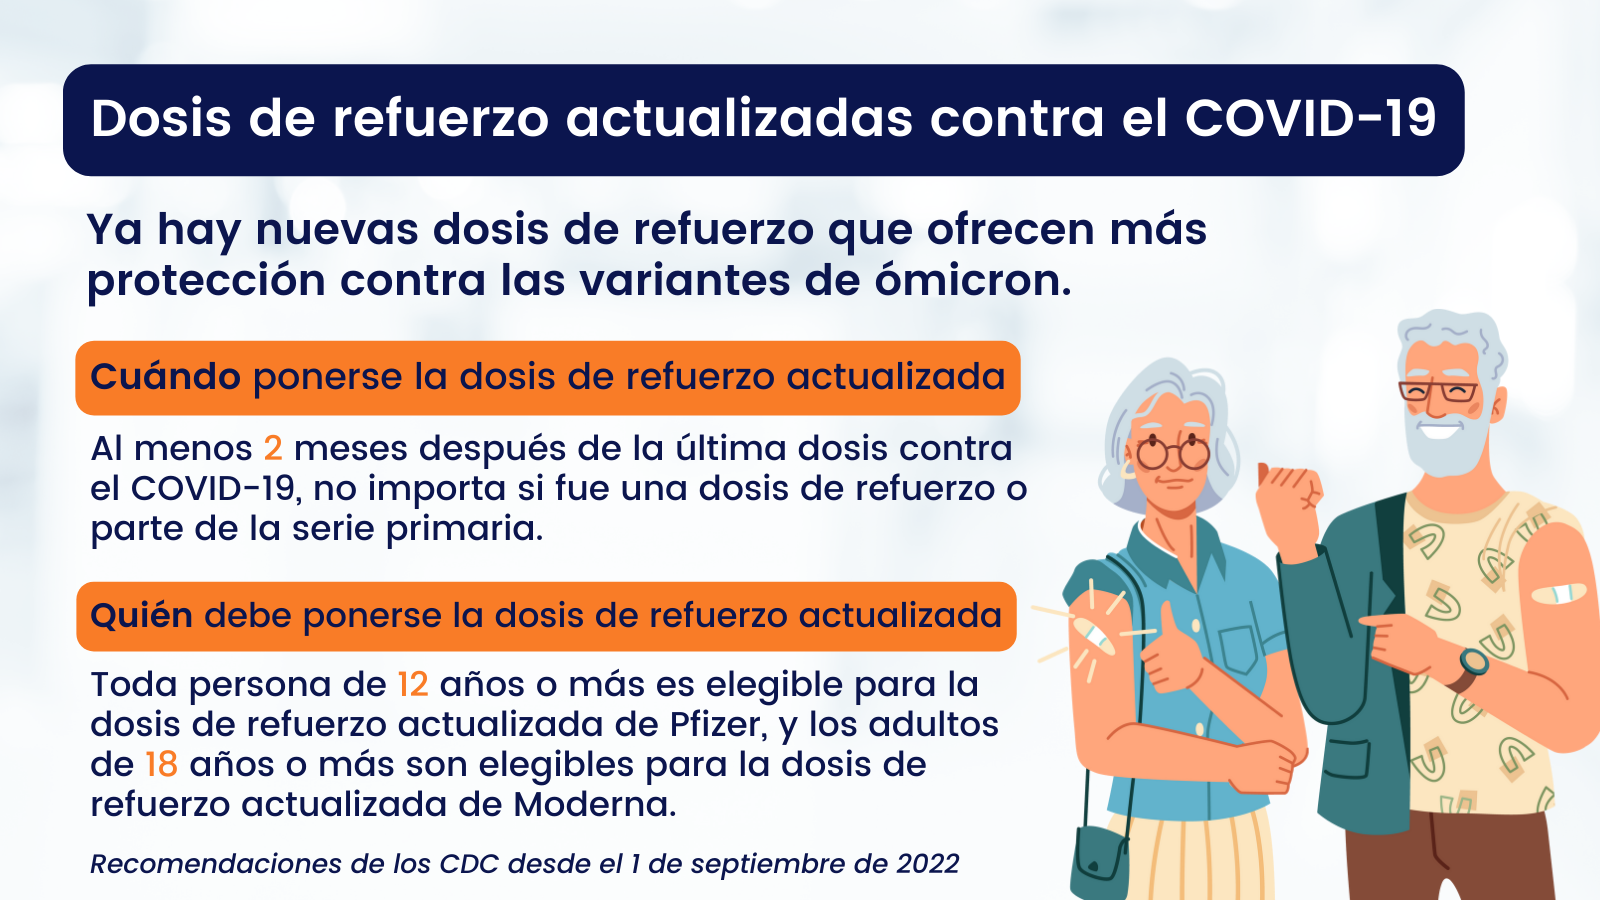 Twitter size image with white background and navy, orange and white text communicates, in Spanish, information about updated COVID-19 booster doses. CDC recommendations as of 09/01/2022 is in the bottom left corner. White older male and female with white and gray hair are smiling and pointing to a band aid on on their upper arm where they received their booster.